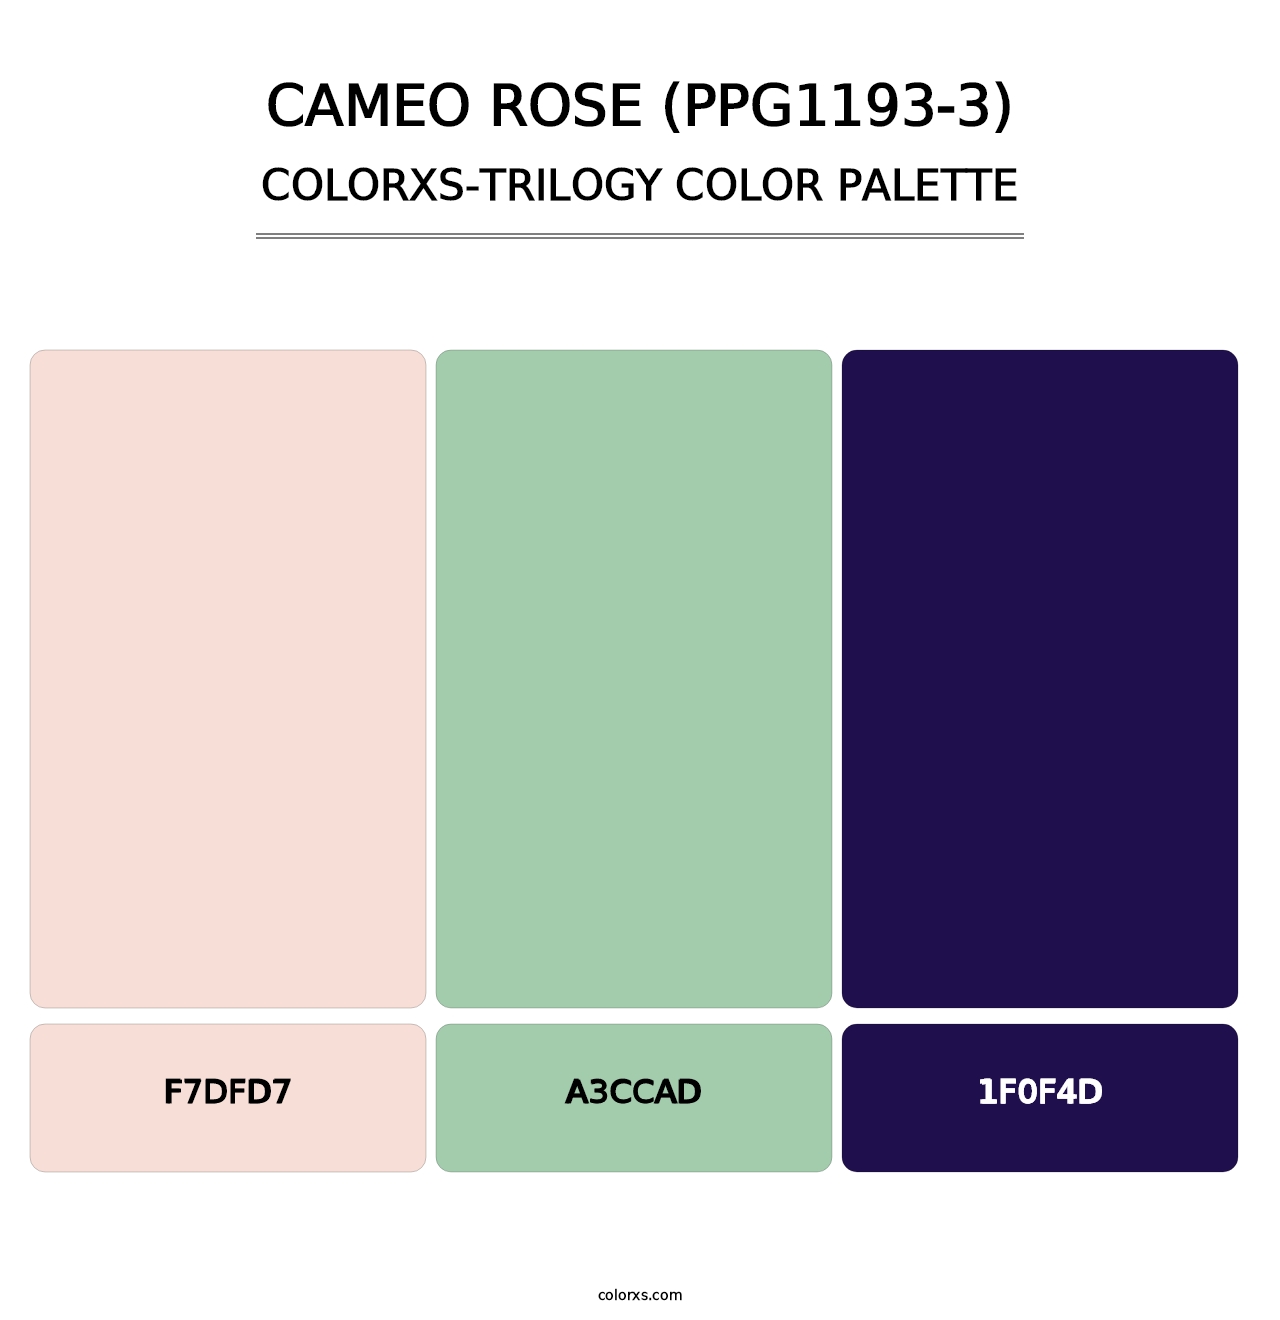 Cameo Rose (PPG1193-3) - Colorxs Trilogy Palette